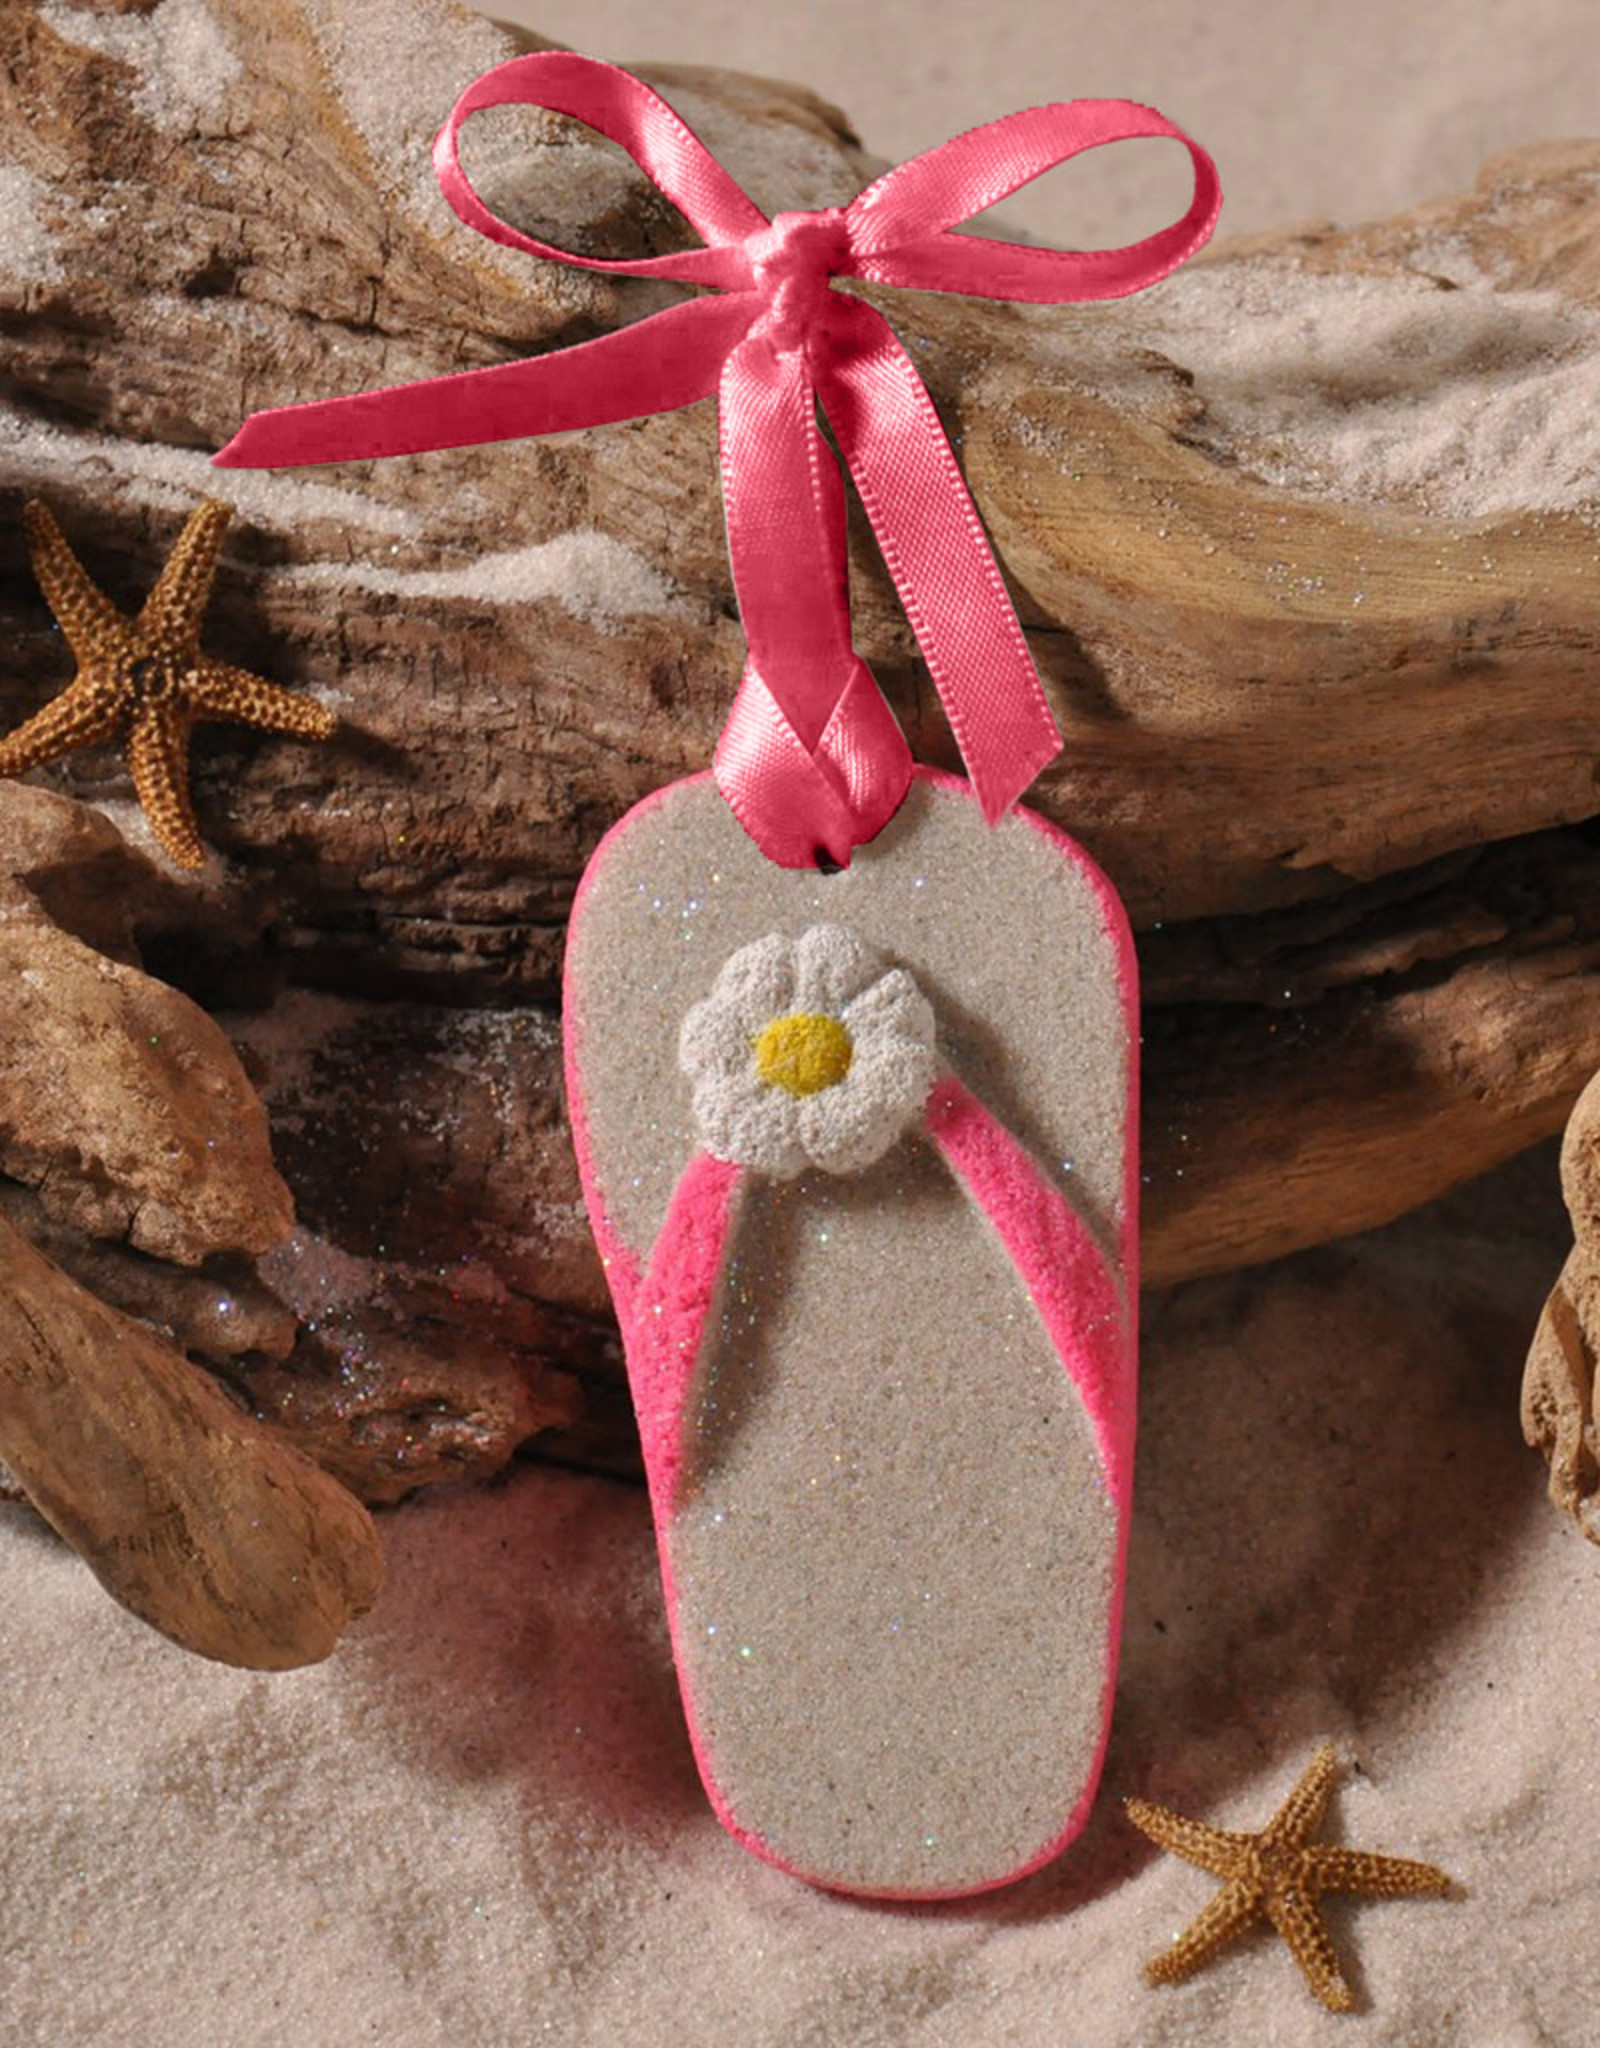 DIGS-N-GIFTS Flip-Flop Sand Christmas Ornament - Pink